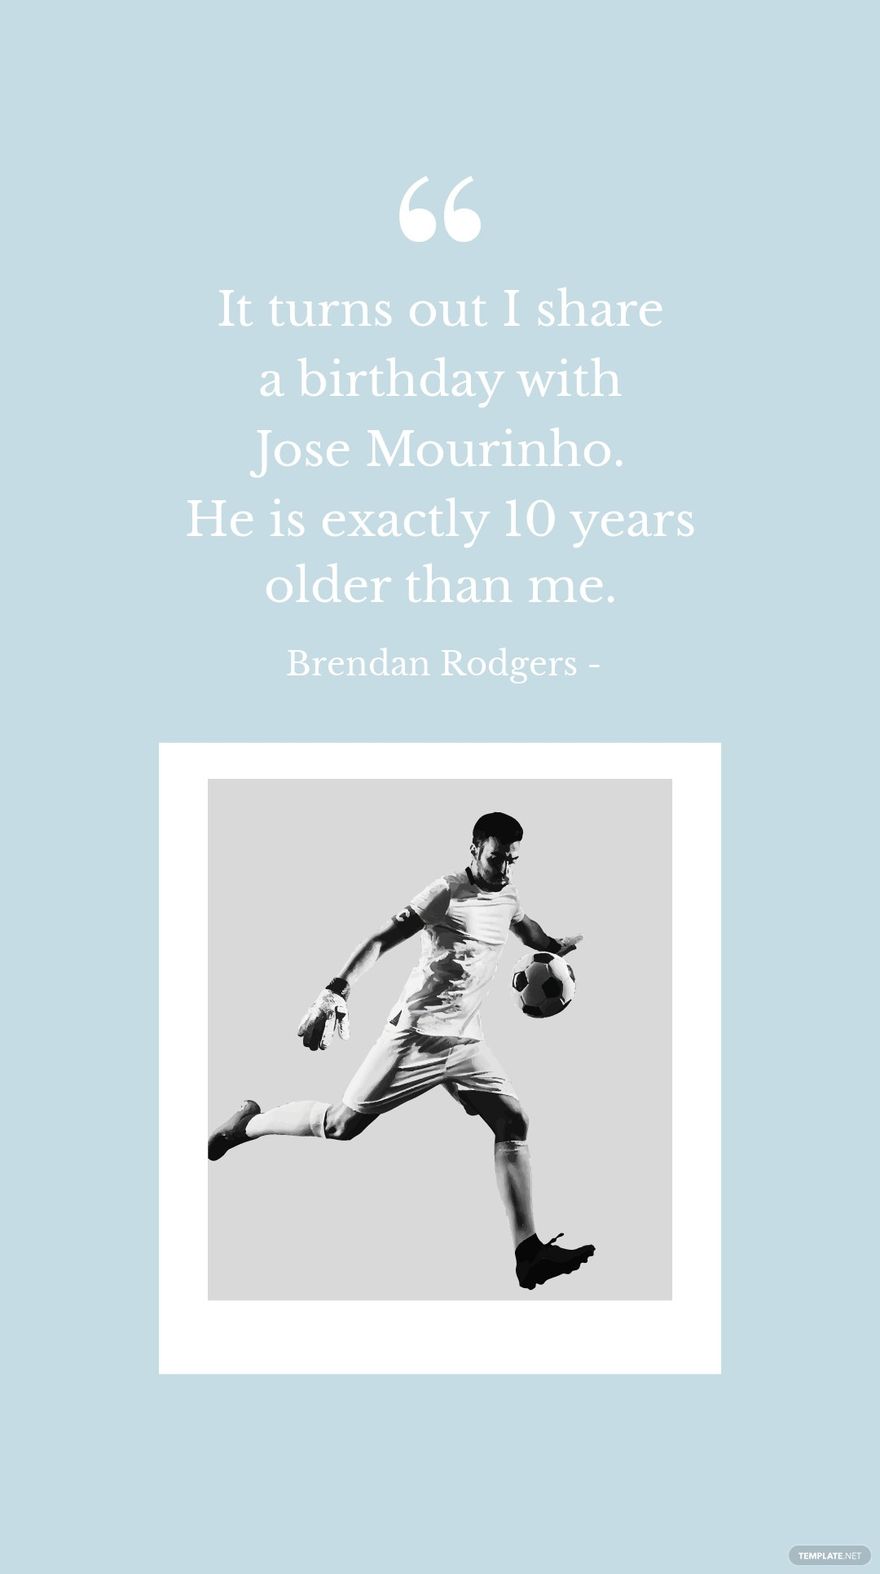 Free Brendan Rodgers - It turns out I share a birthday with Jose Mourinho. He is exactly 10 years older than me. in JPG